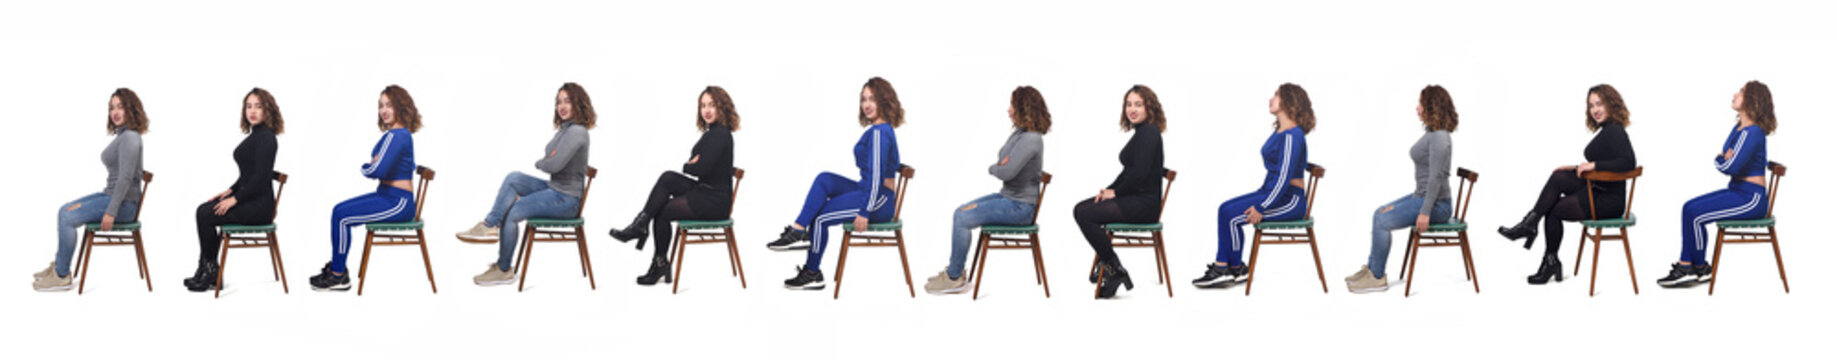 large group of a same woman sitting of profile with different ways of dressing on white background